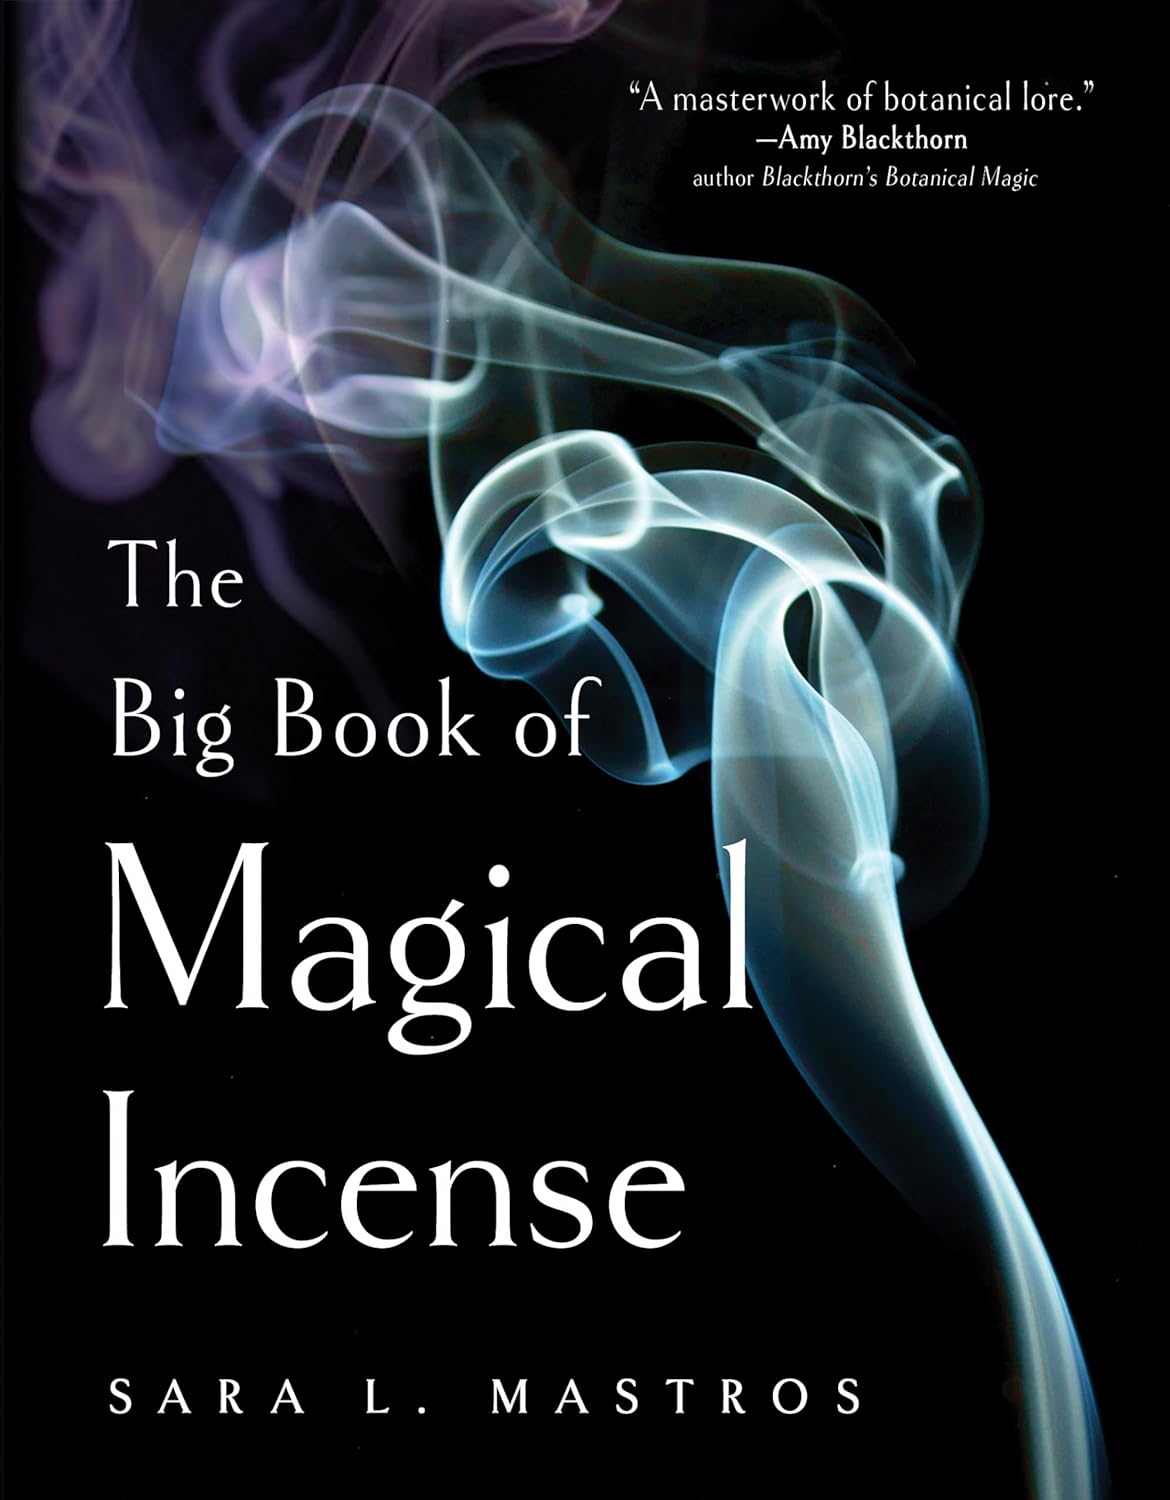 The Big Book of Magical Incense by Sara L Mastros